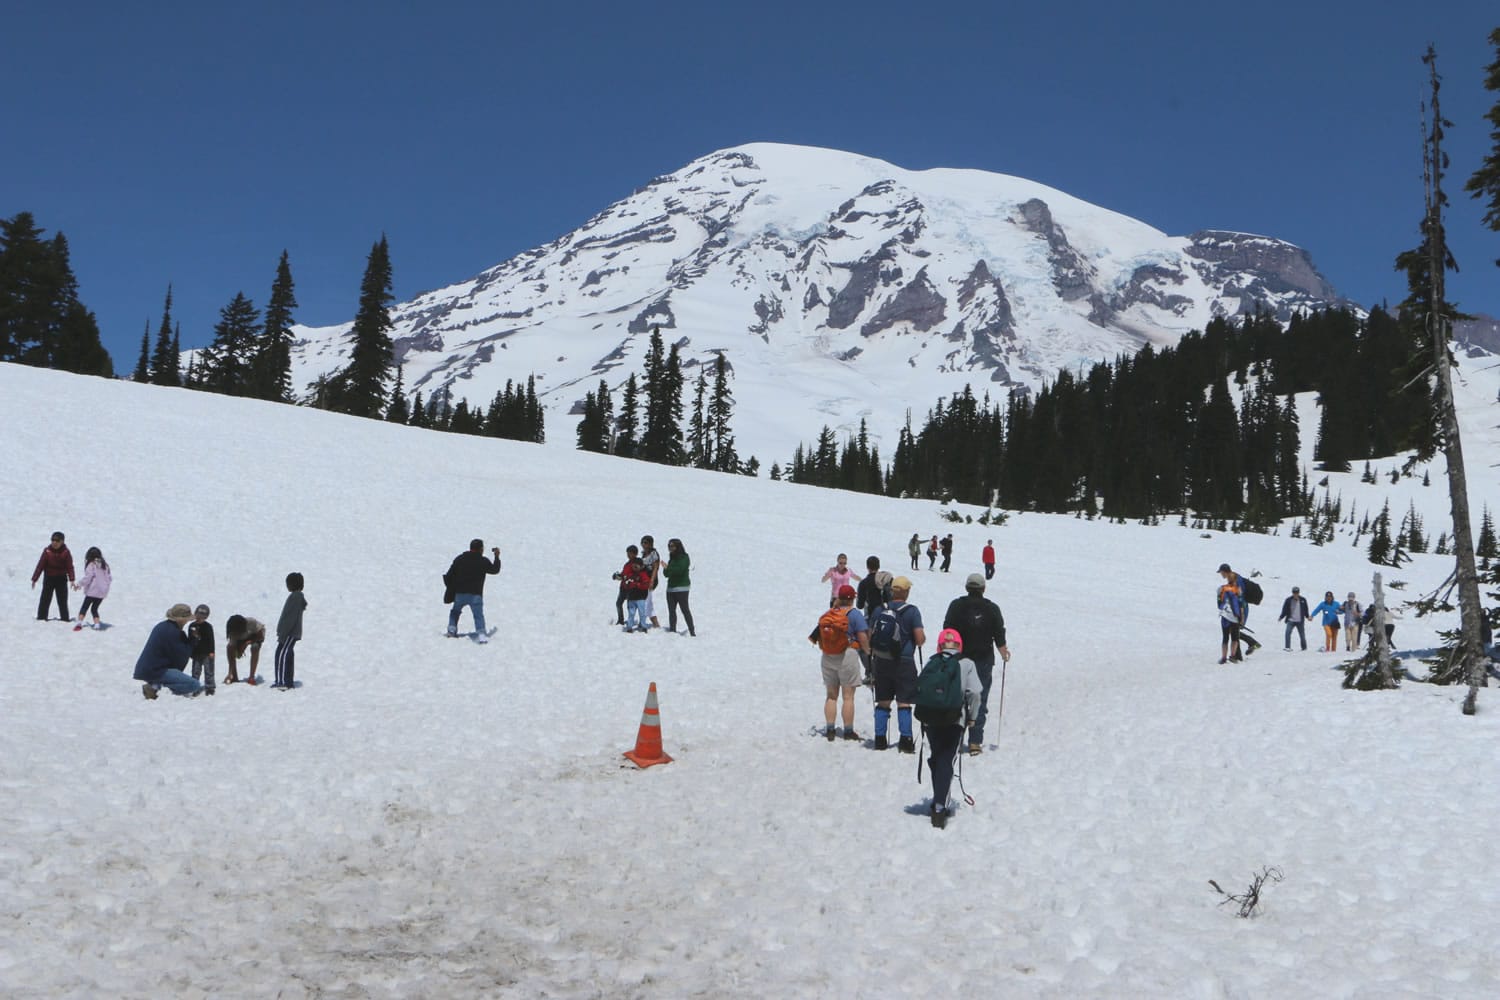 Visitors hike through the snow Sunday at the trails that start from Mount Rainier's Paradise Visitor Cente.